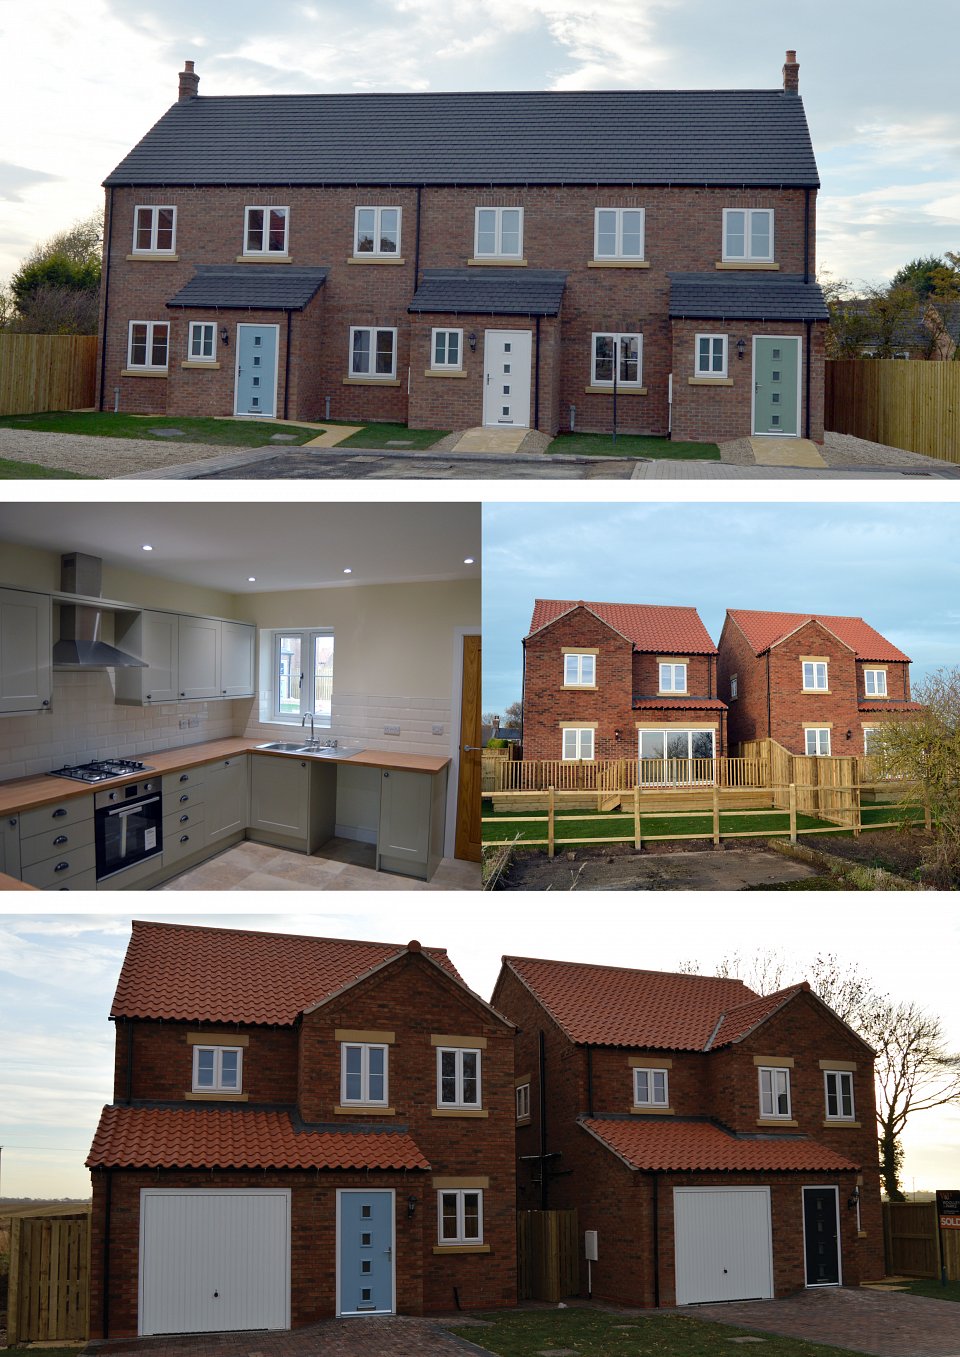 Phase One Completion: 24 houses in Beeford, East Riding of Yorkshire